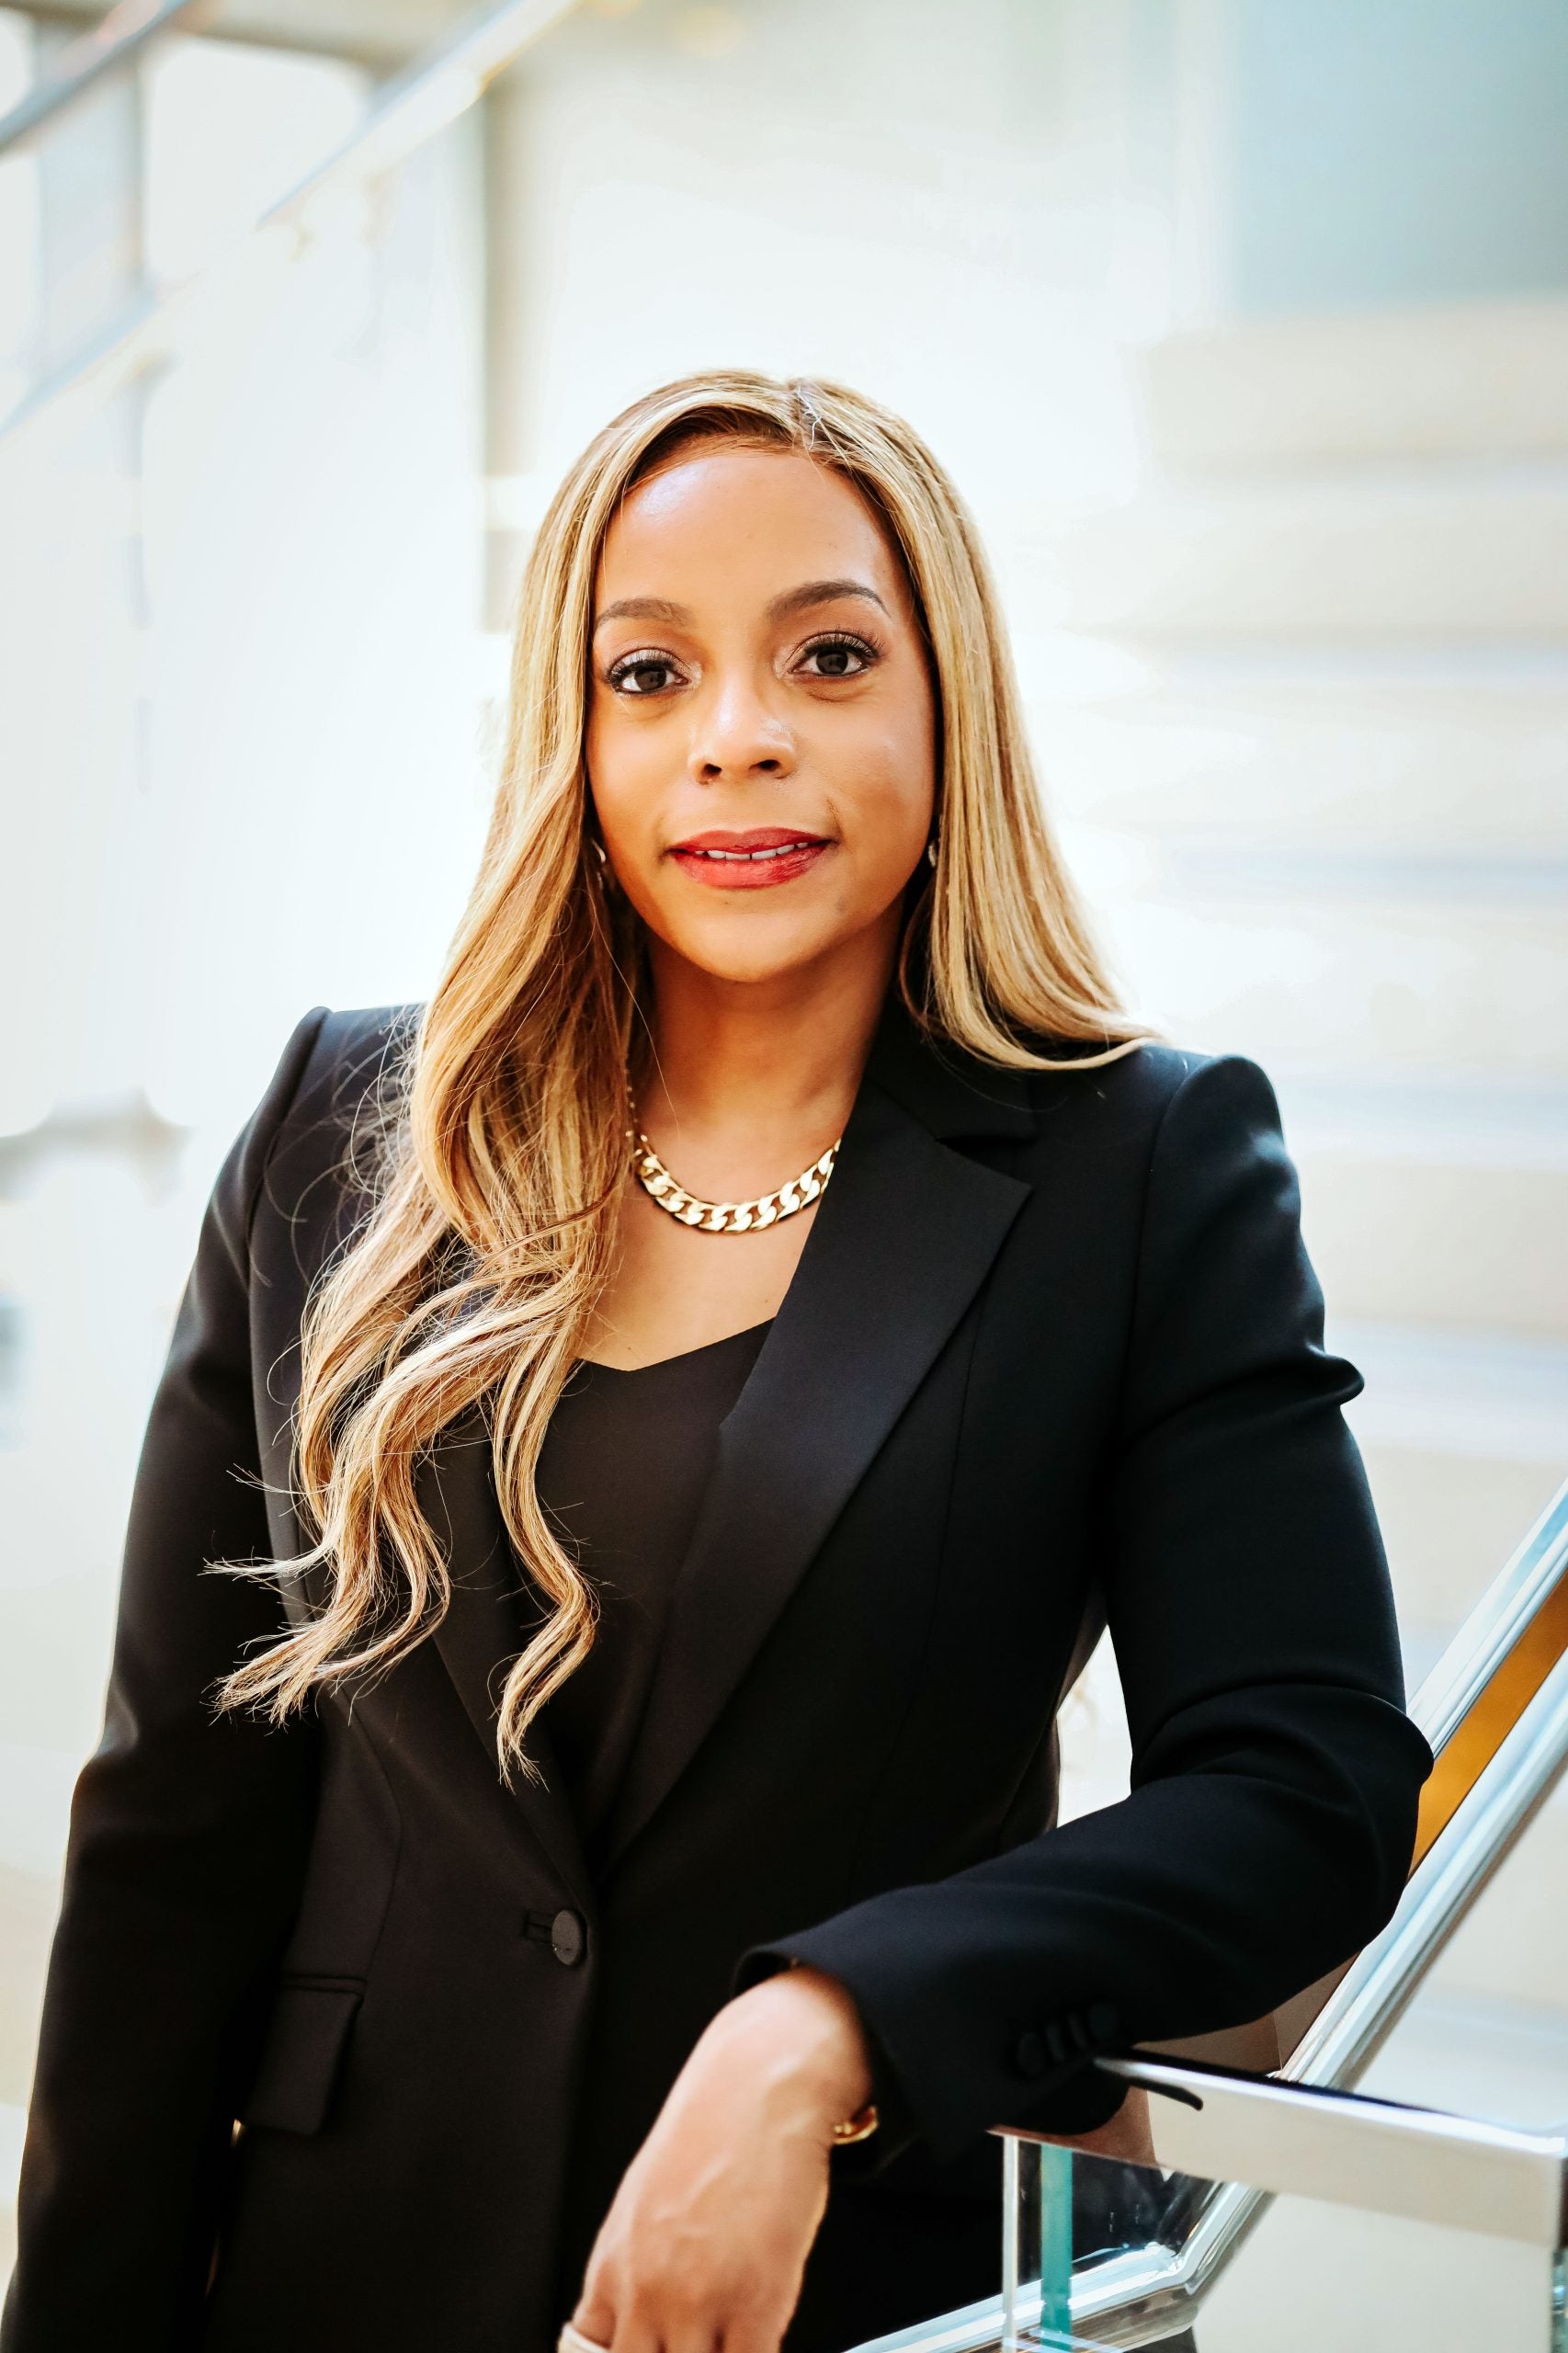 Will Ambition Ever Truly Pay Off For Black Women? This CEO Says “Yes.” Just Not In The Way You May Think.